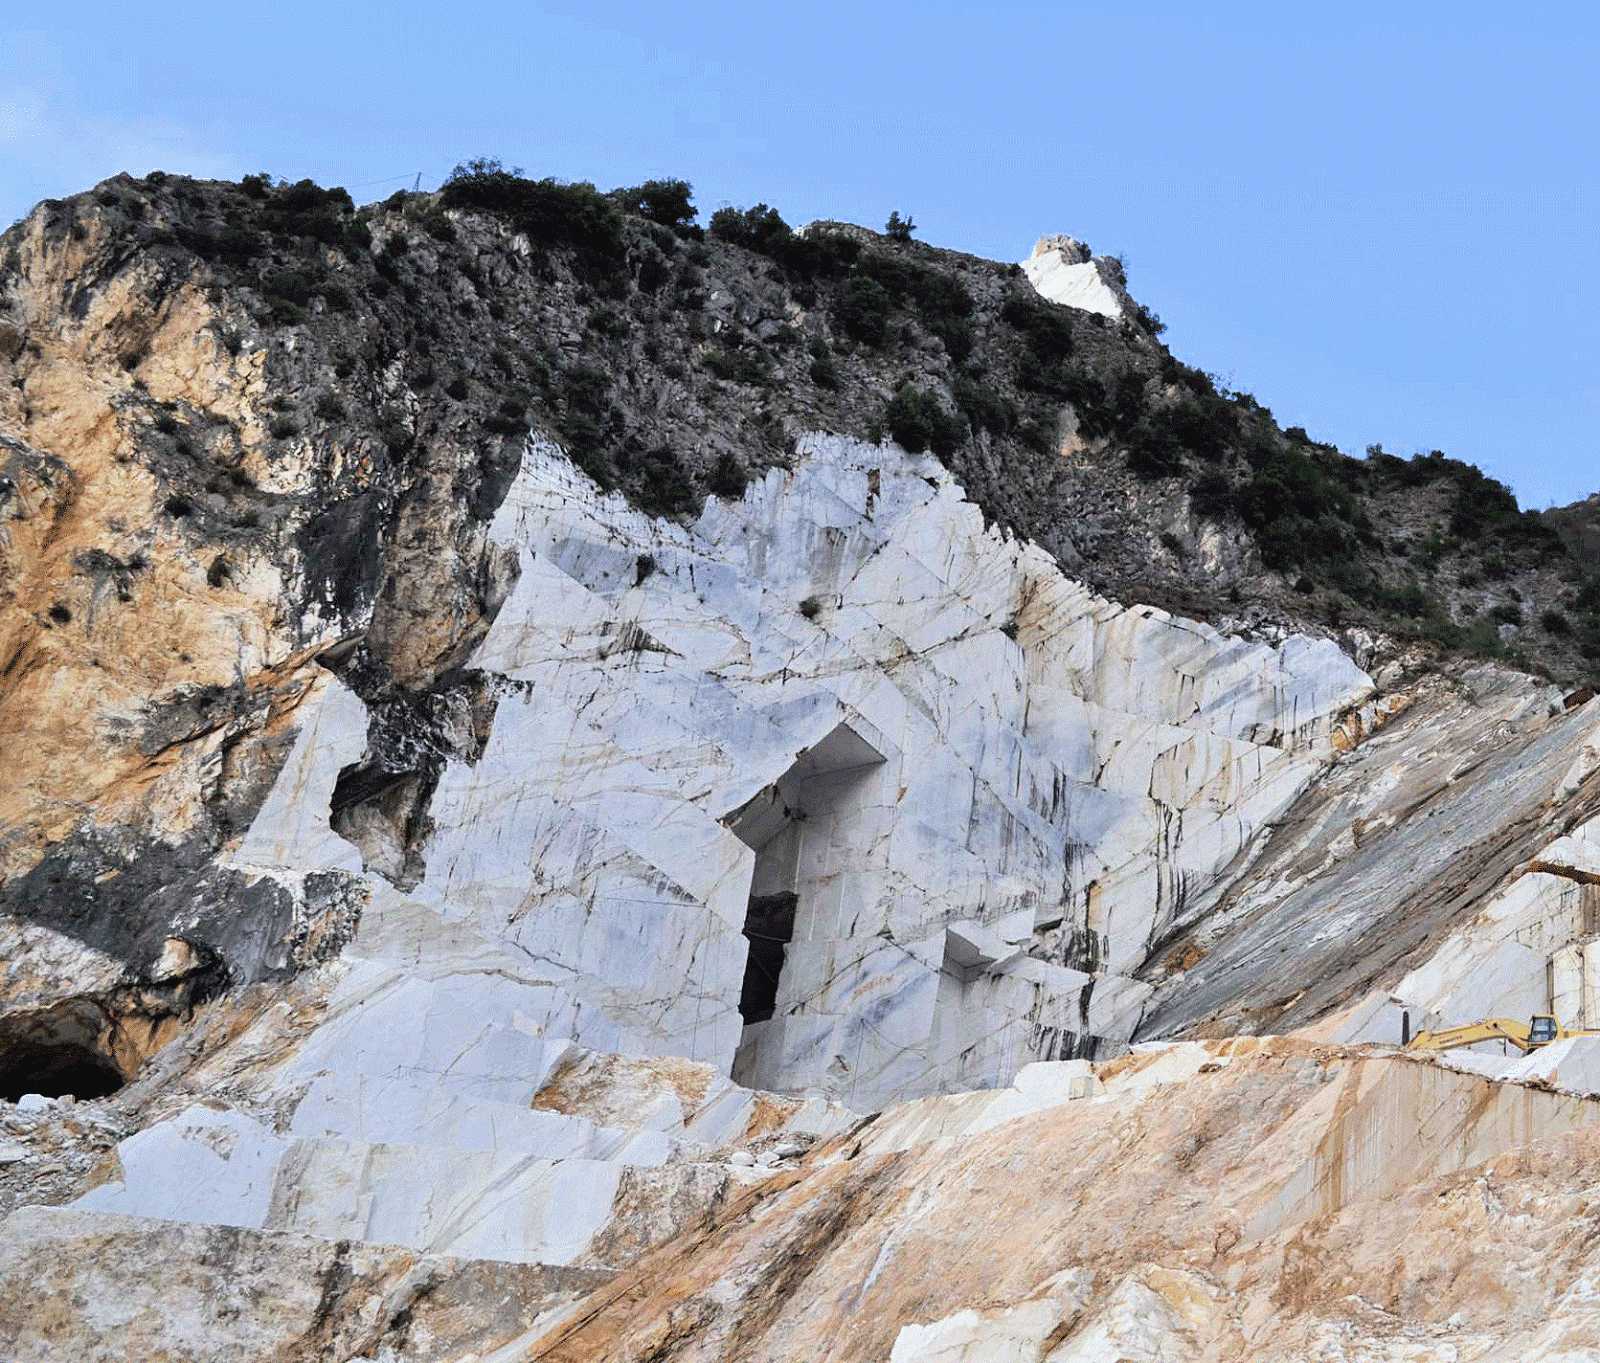 The legendary Carrara marble quarries gave birth to many a Michelangelo masterpiece. All photography is the property of James Jones unless noted. Unauthorized use is prohibited.